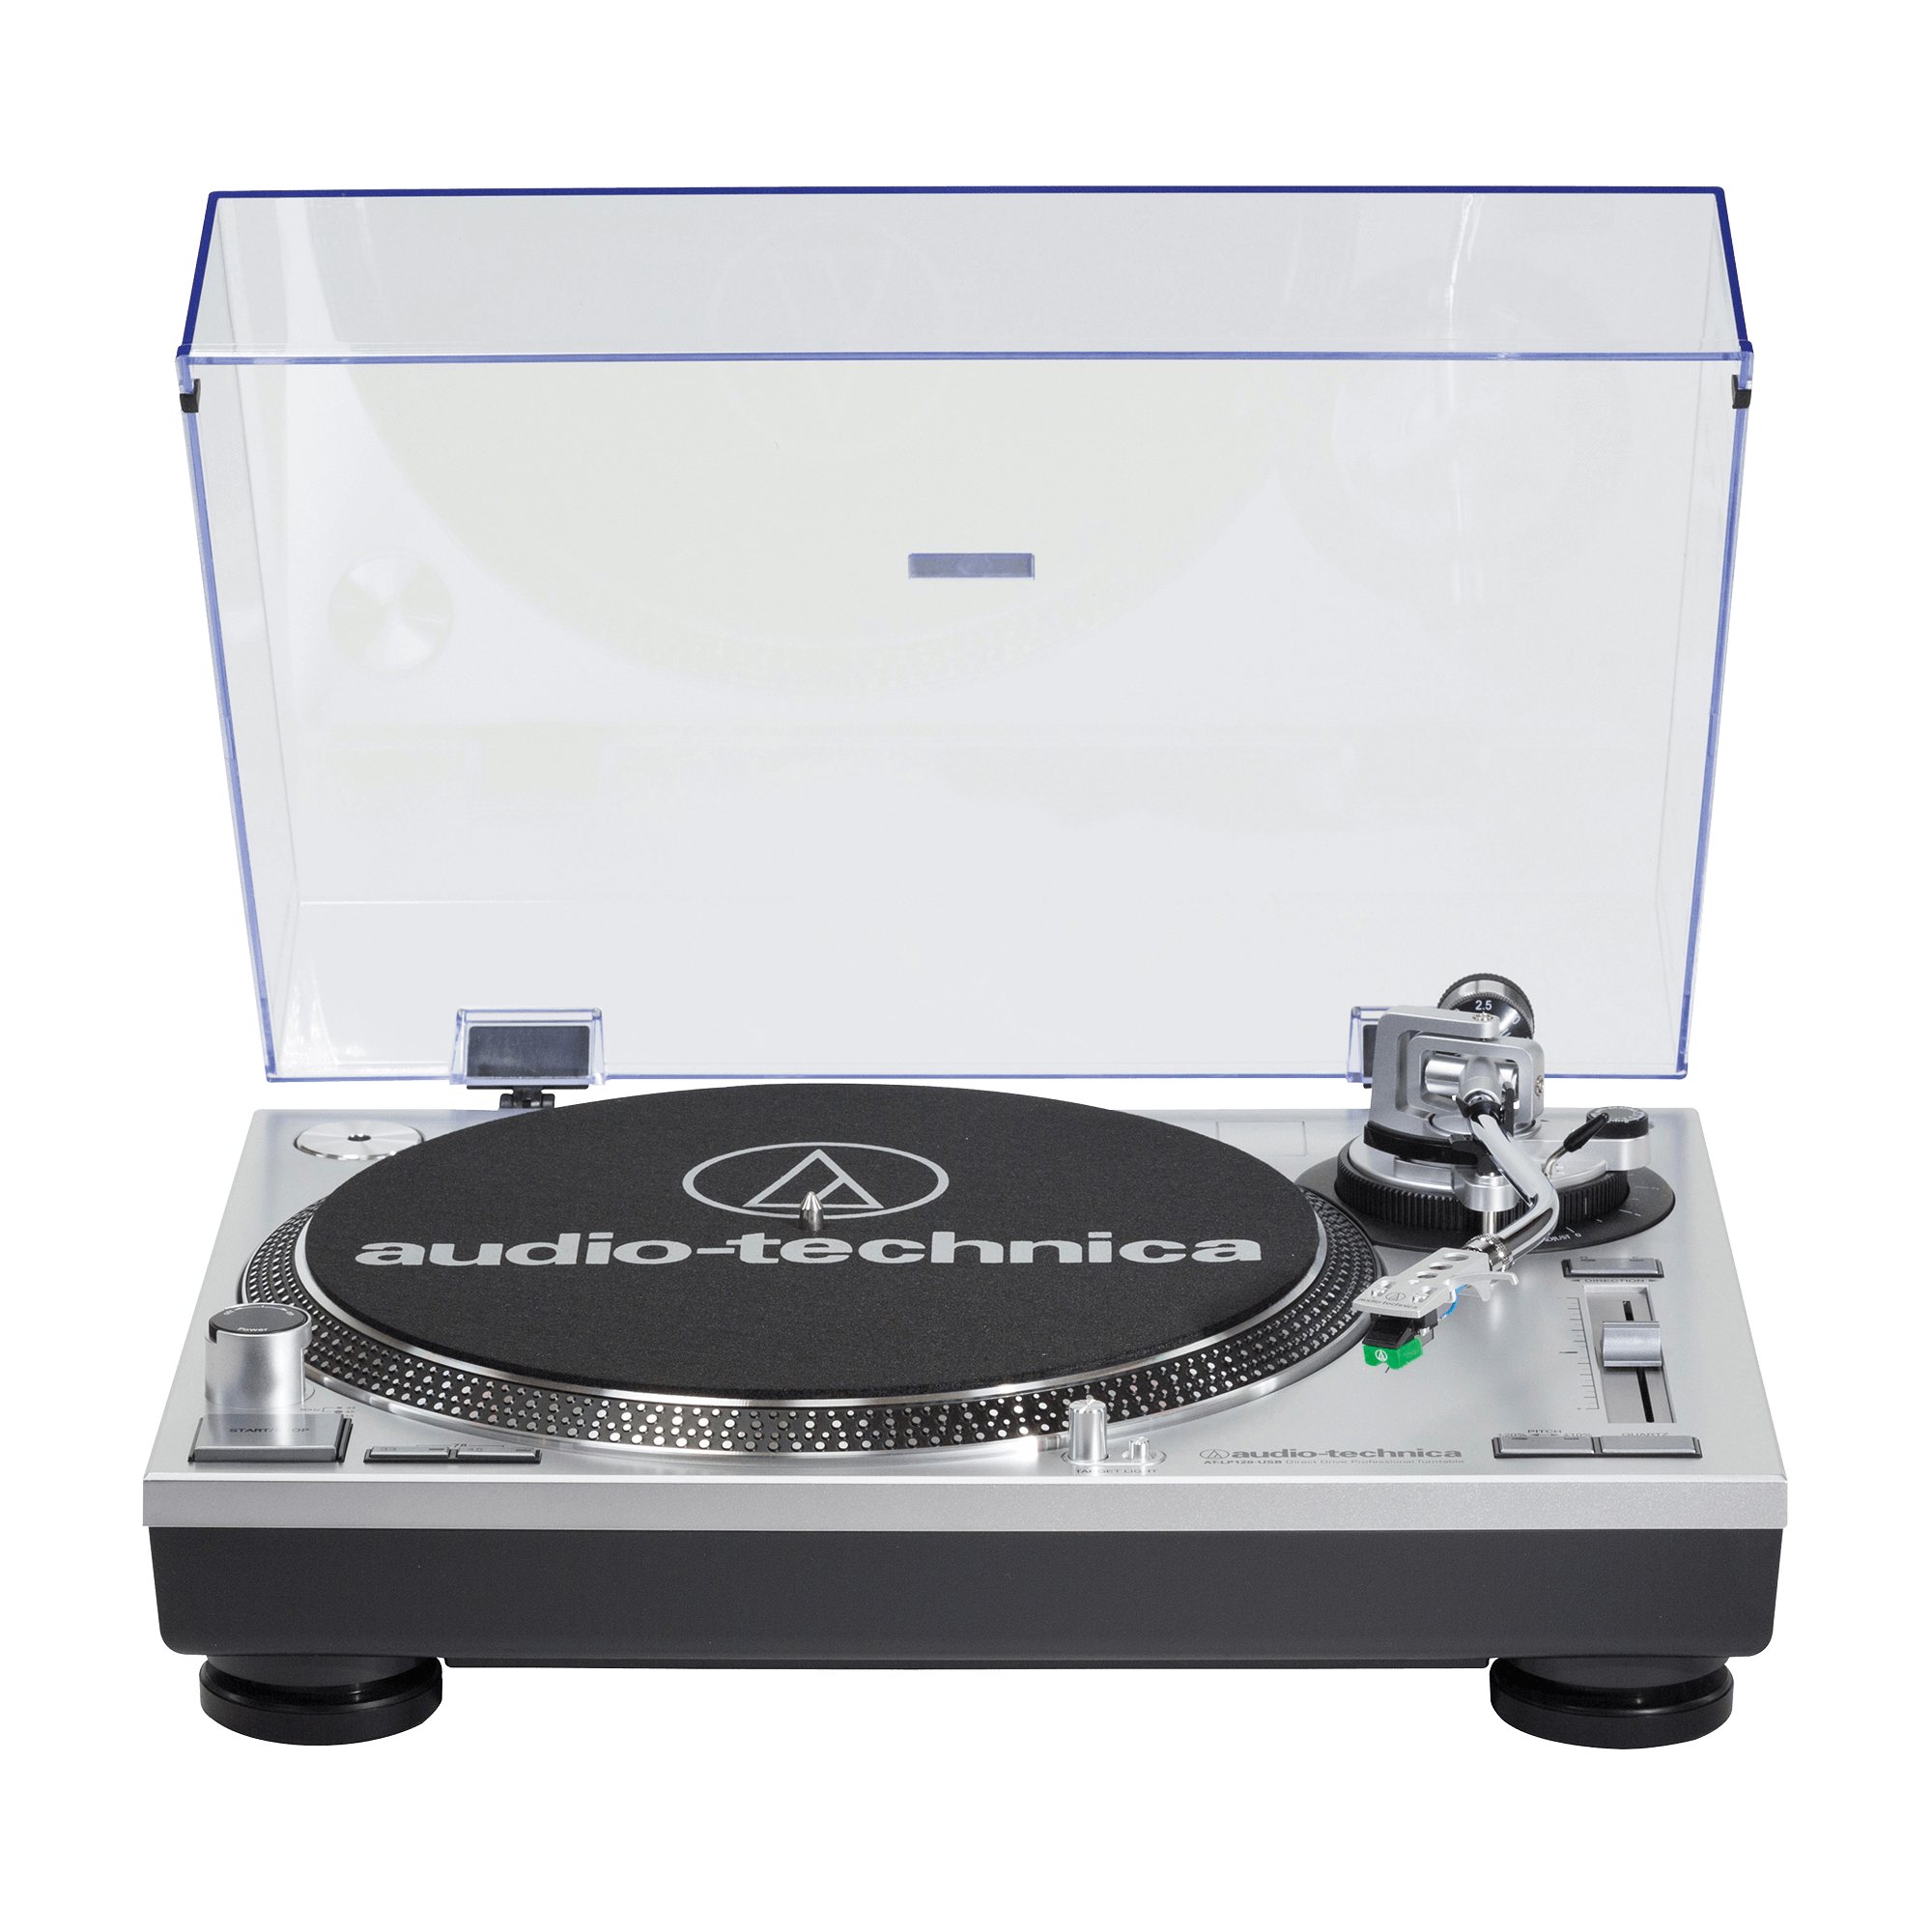 Audio-Technica AT-LP120-USB turntable review: Listen to your vinyl  collection and digitize it, too